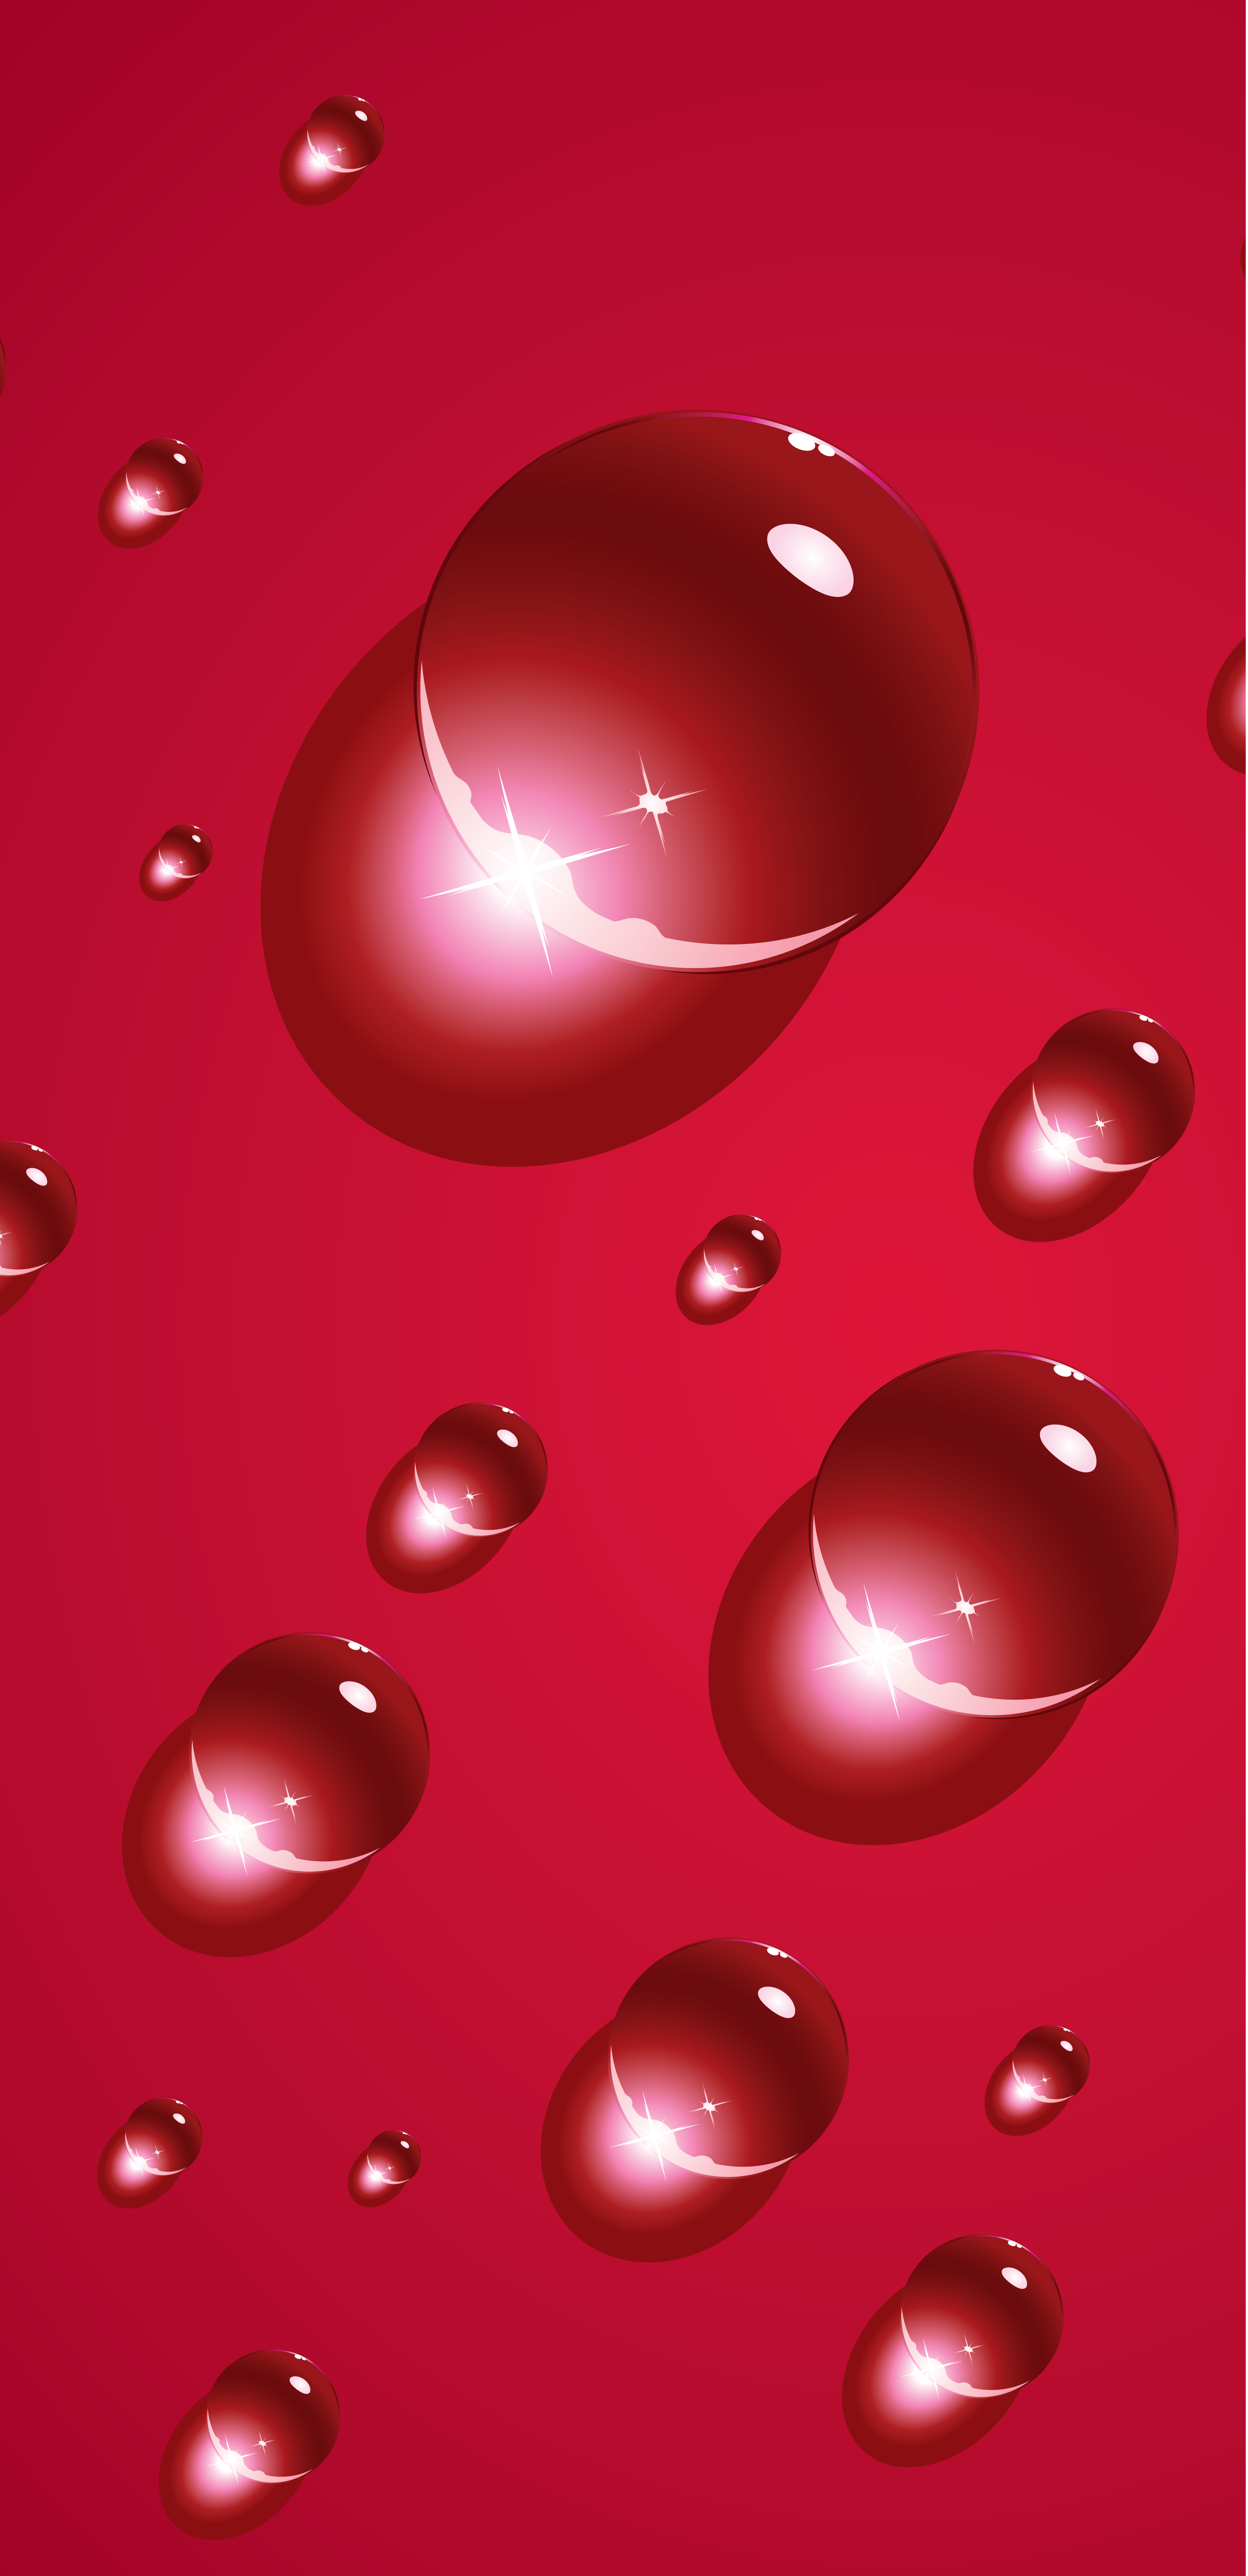 water droplet wallpaper iPhone ongliong11 idownloadblog red